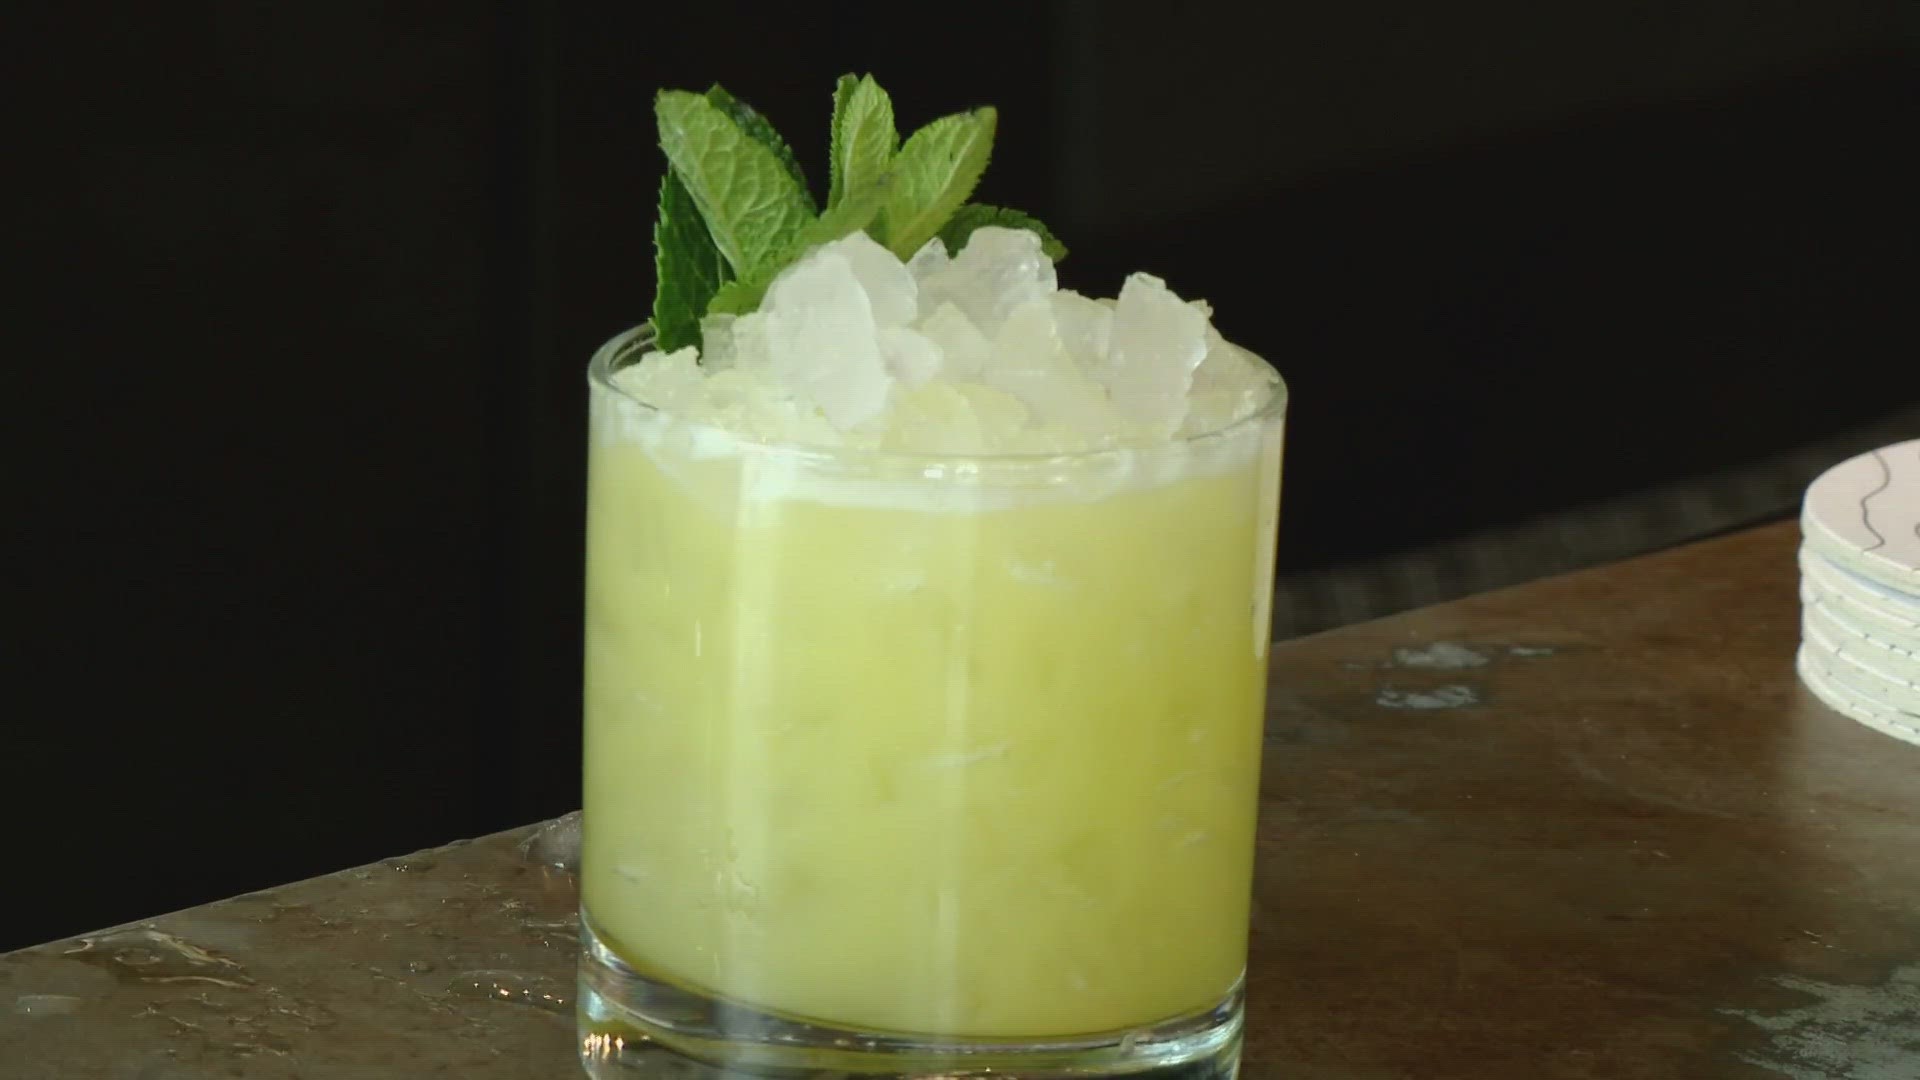 207 heads to the Portland Hunt and Alpine Club to try some of their spring mocktails you can make at home.